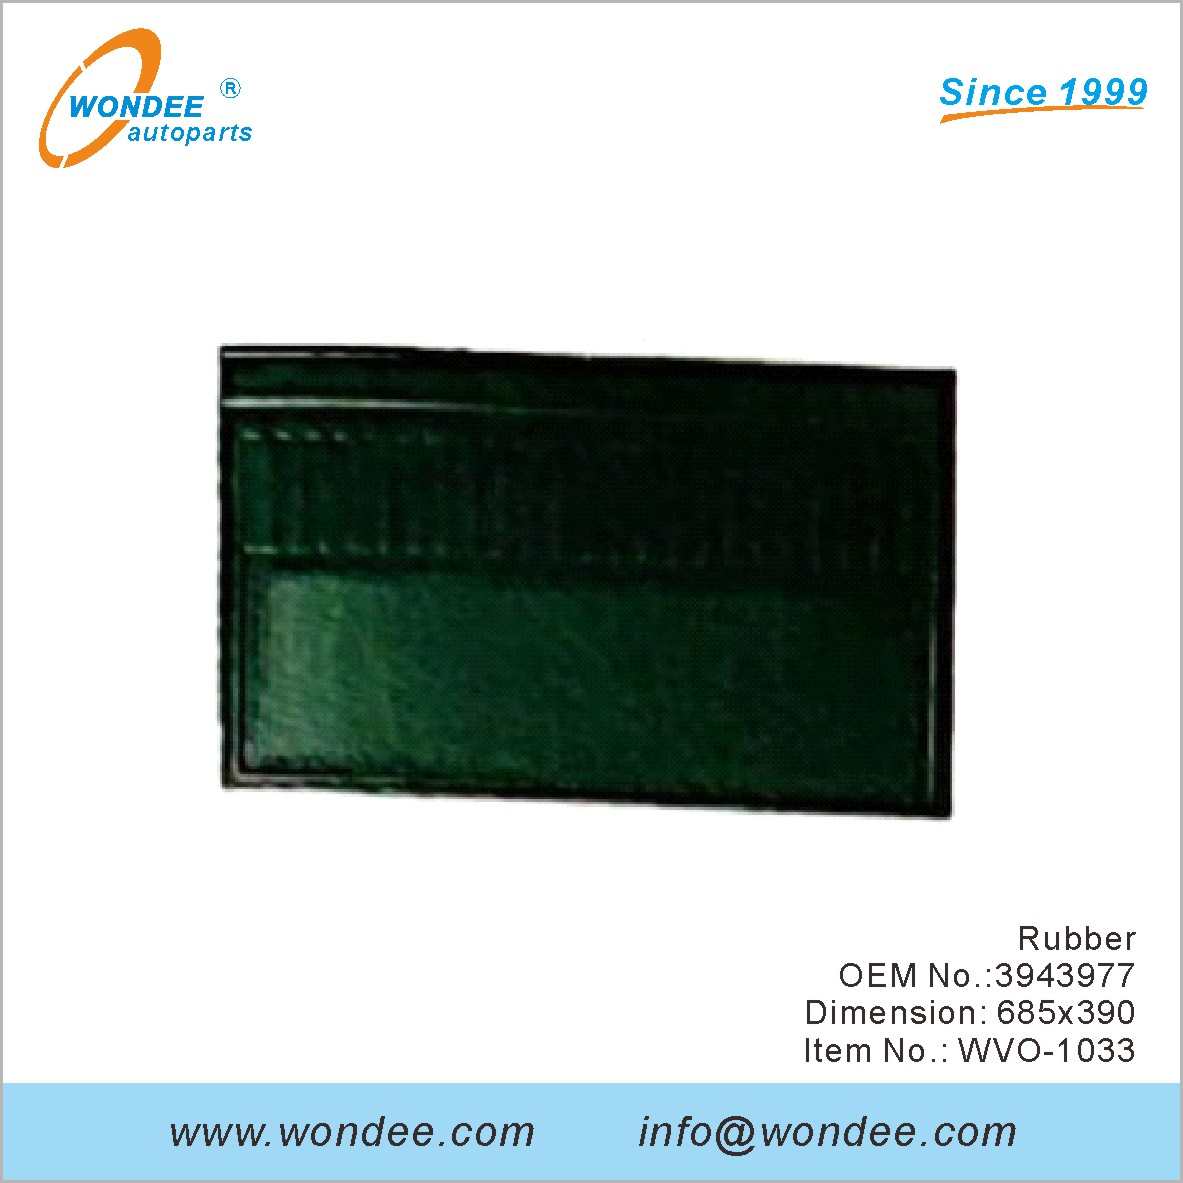 Rubber OEM 3943977 for Volvo from WONDEE